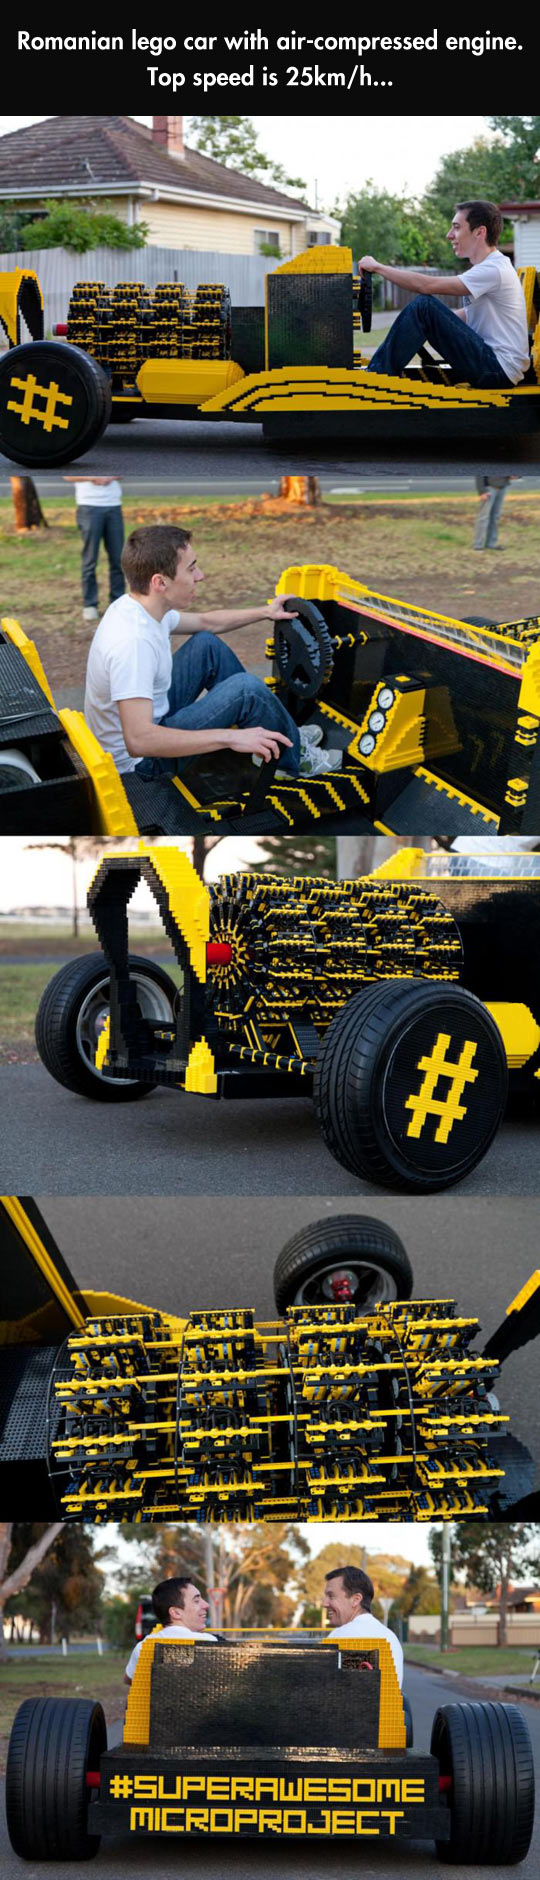 Working car made of Lego's